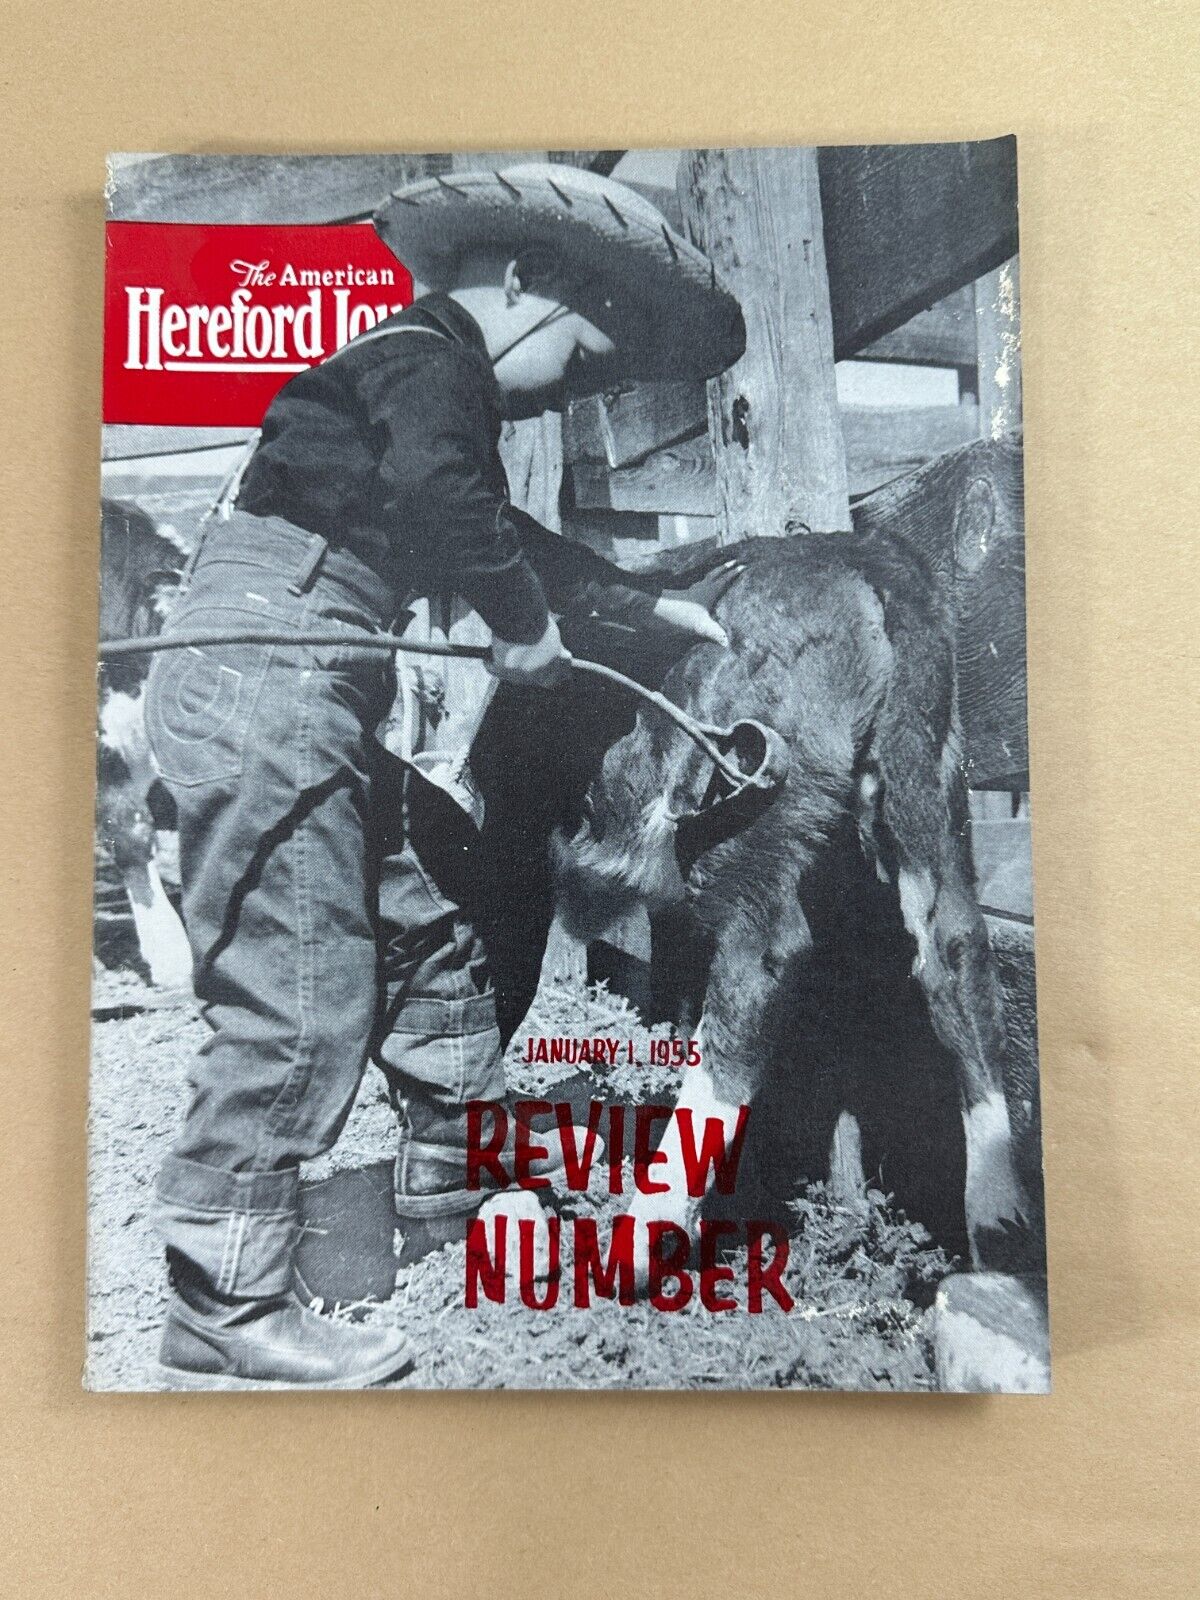 January 1, 1955 REVIEW NUMBER - American Hereford Journal magazine - photos ads+